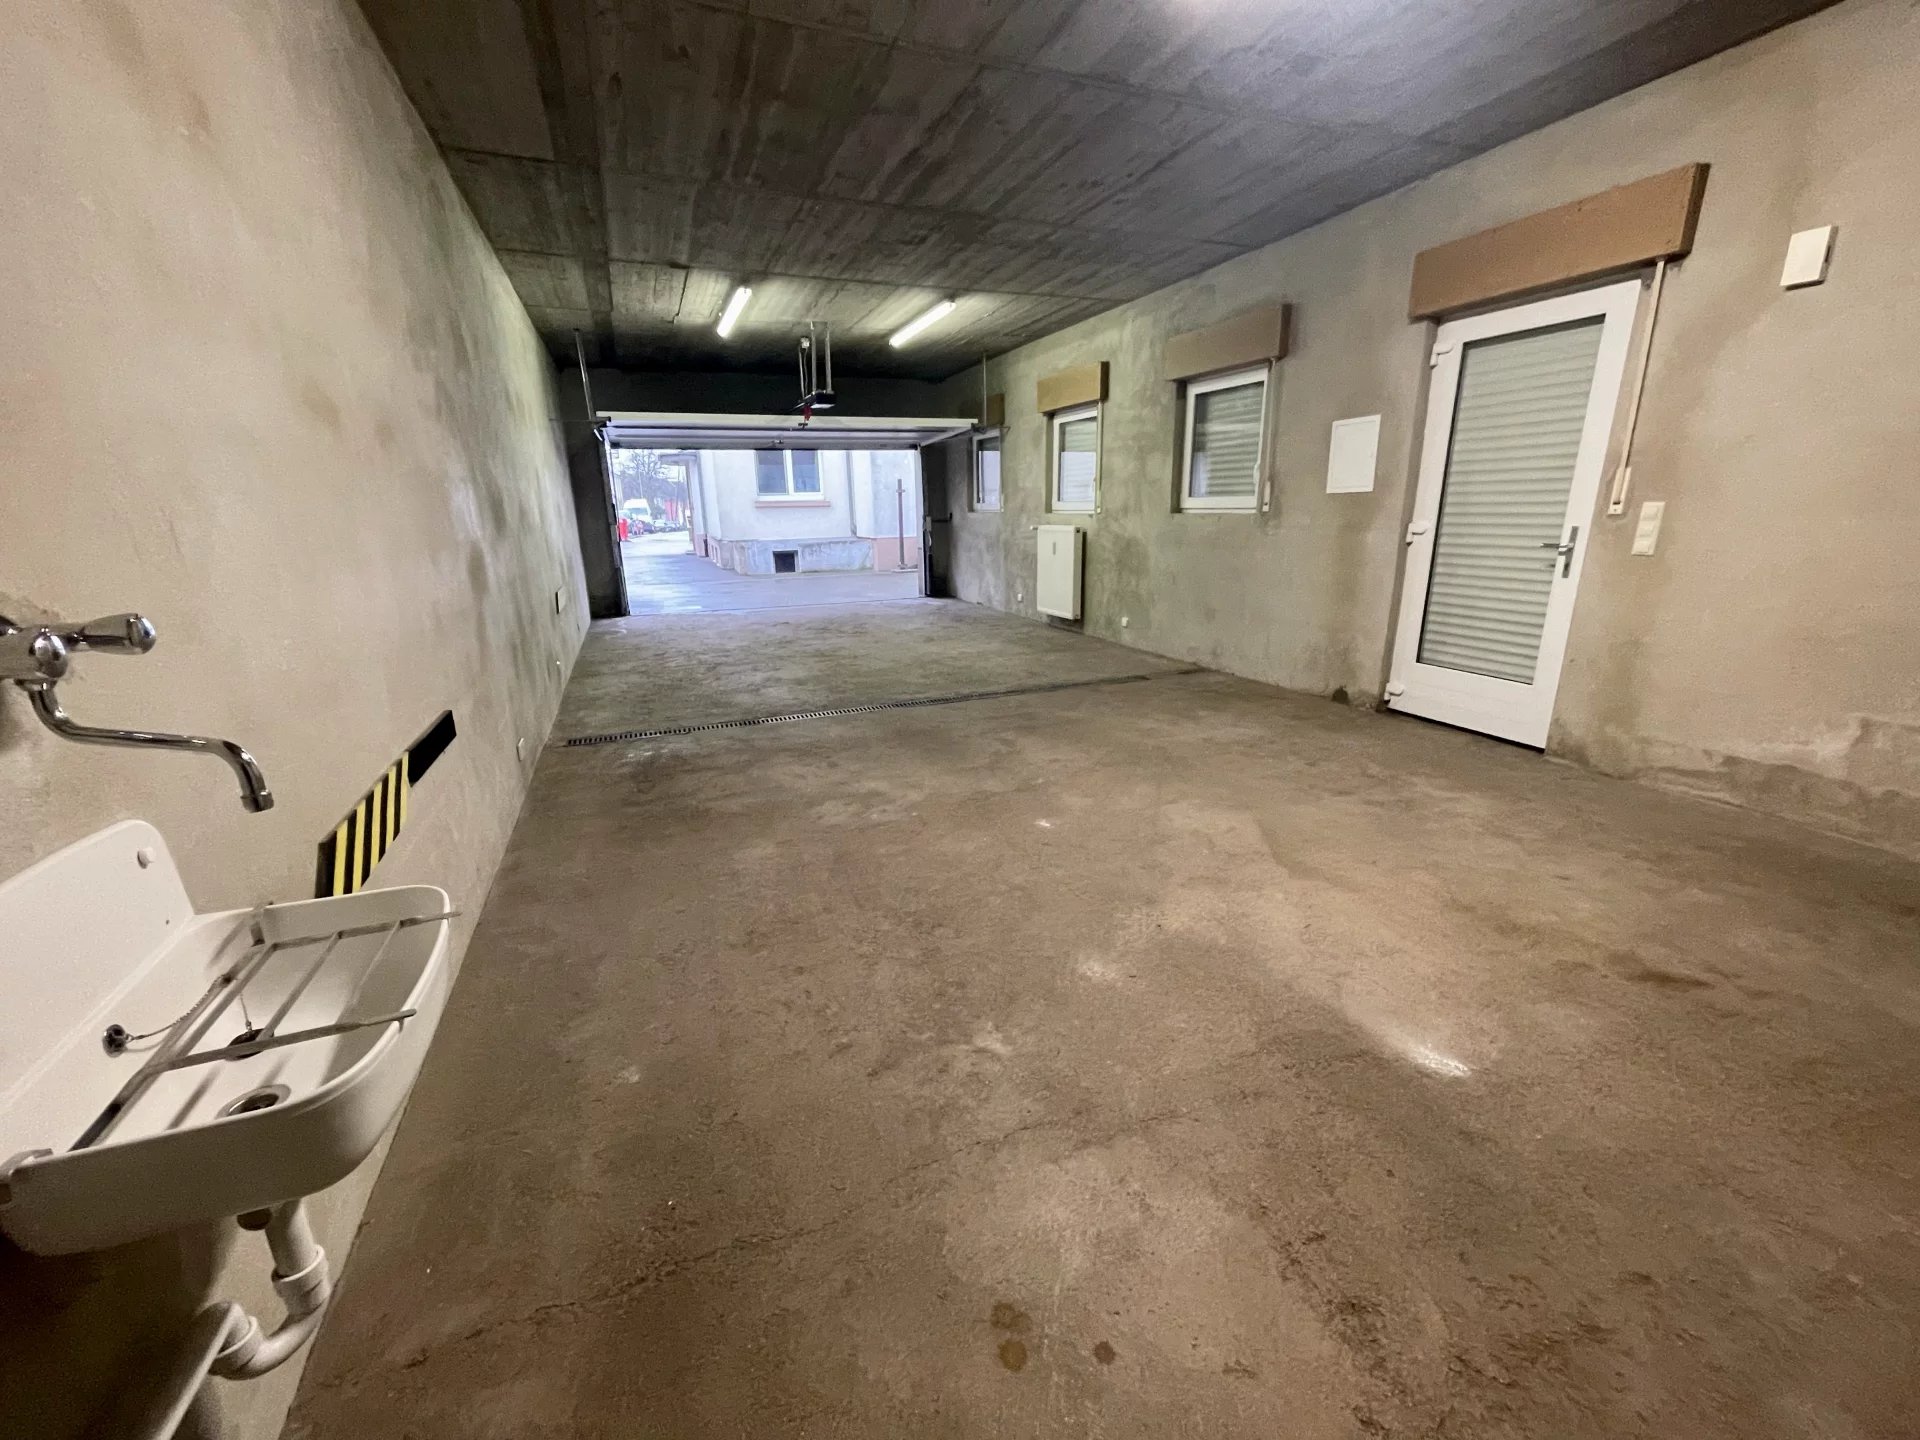 Location Garage - Luxembourg Gasperich - Luxembourg